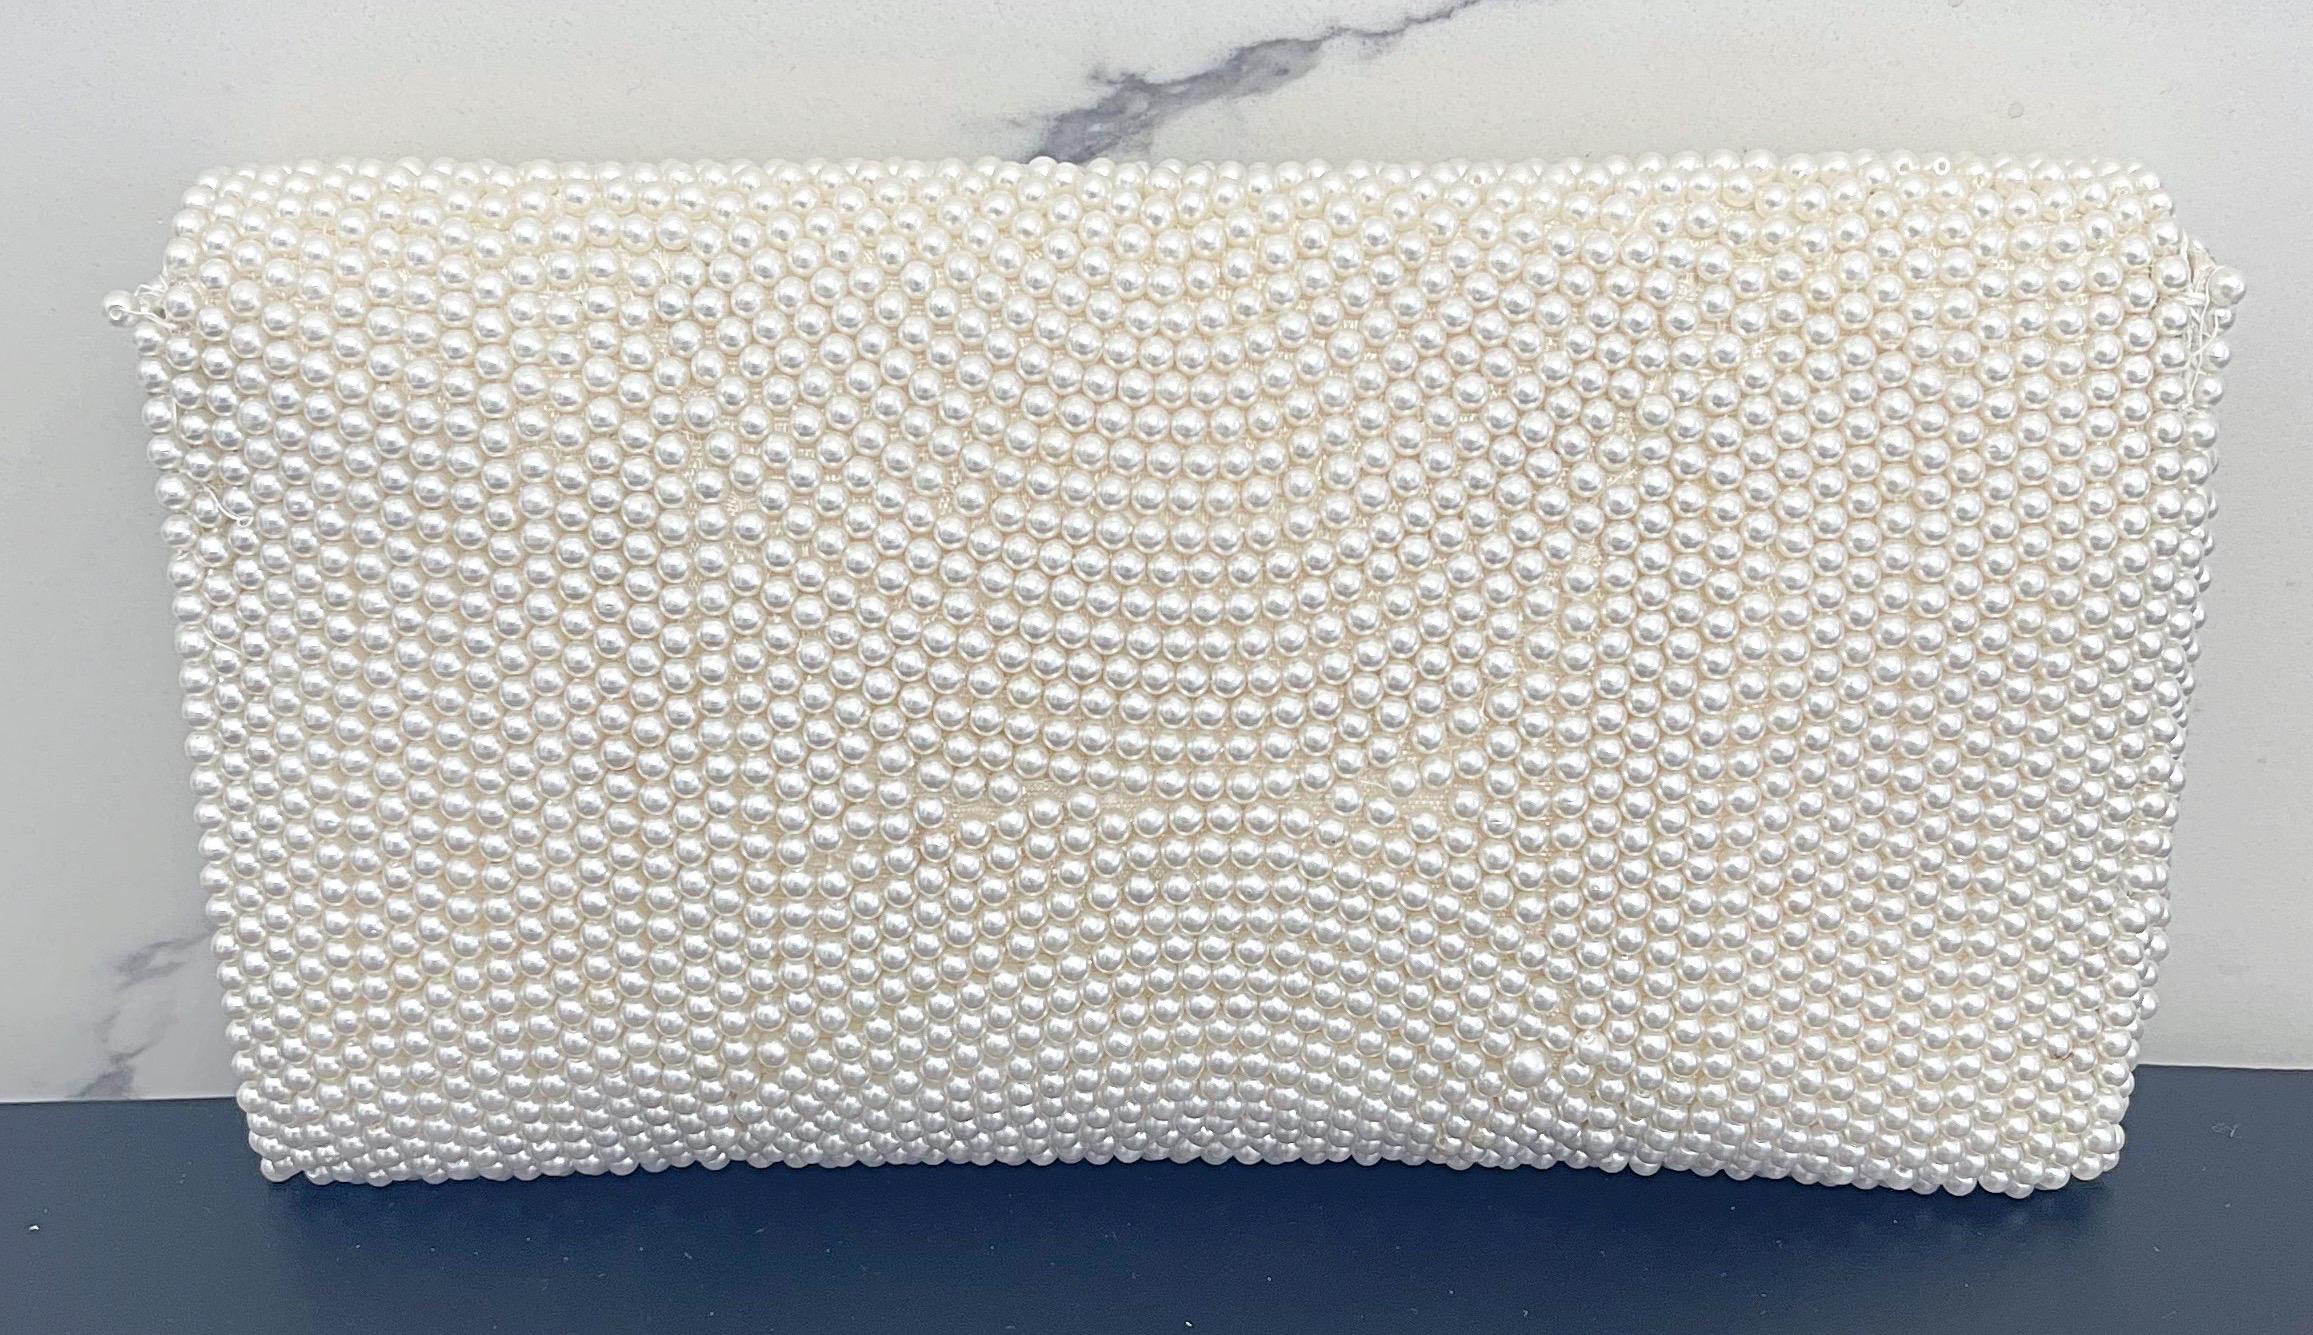 1950s White Pearl Bead Encrusted Vintage Bridal Wedding Vintage 50s Clutch Bag In Excellent Condition For Sale In San Diego, CA